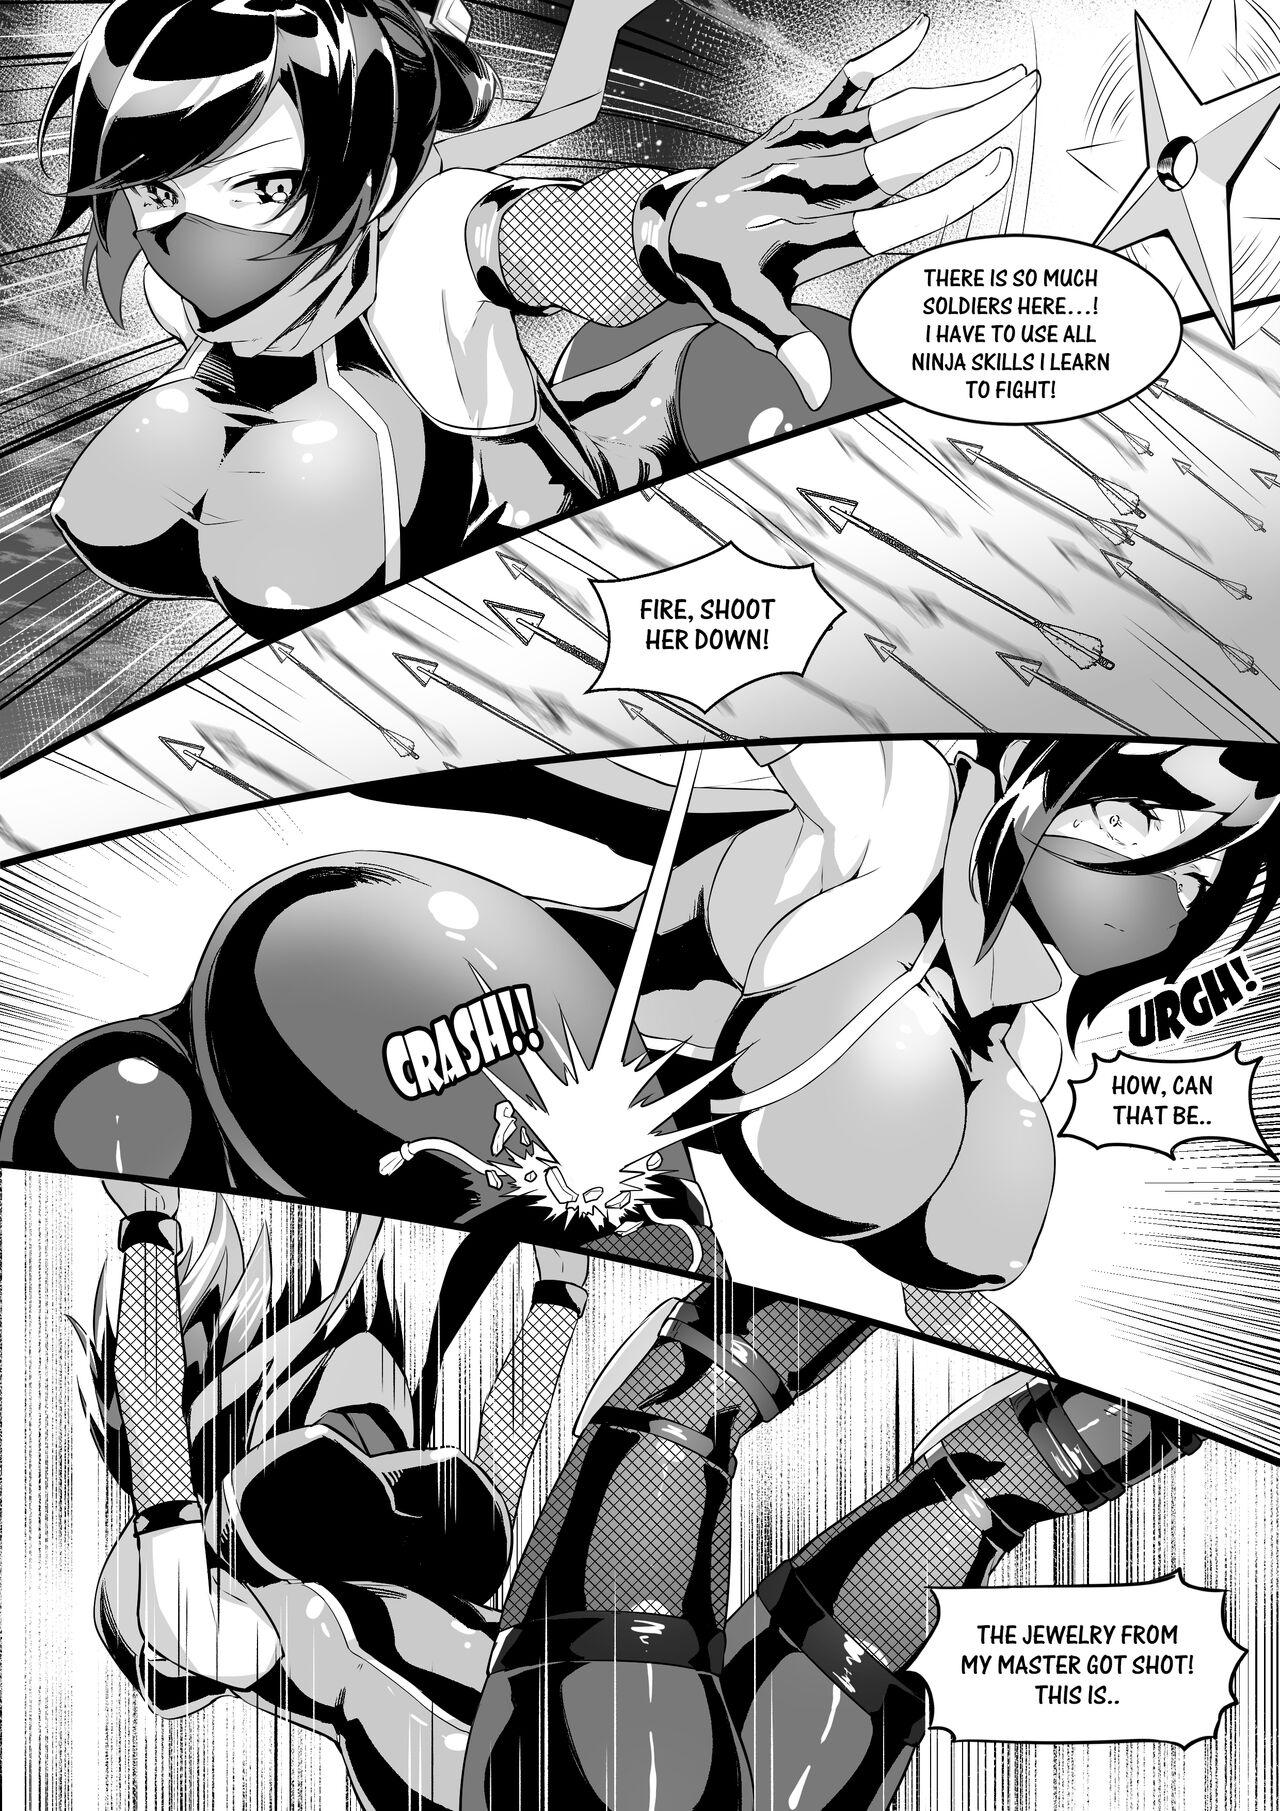 Stretching Giant Shadow Looming Over Stealth in Eastern Style - Original Female - Page 4